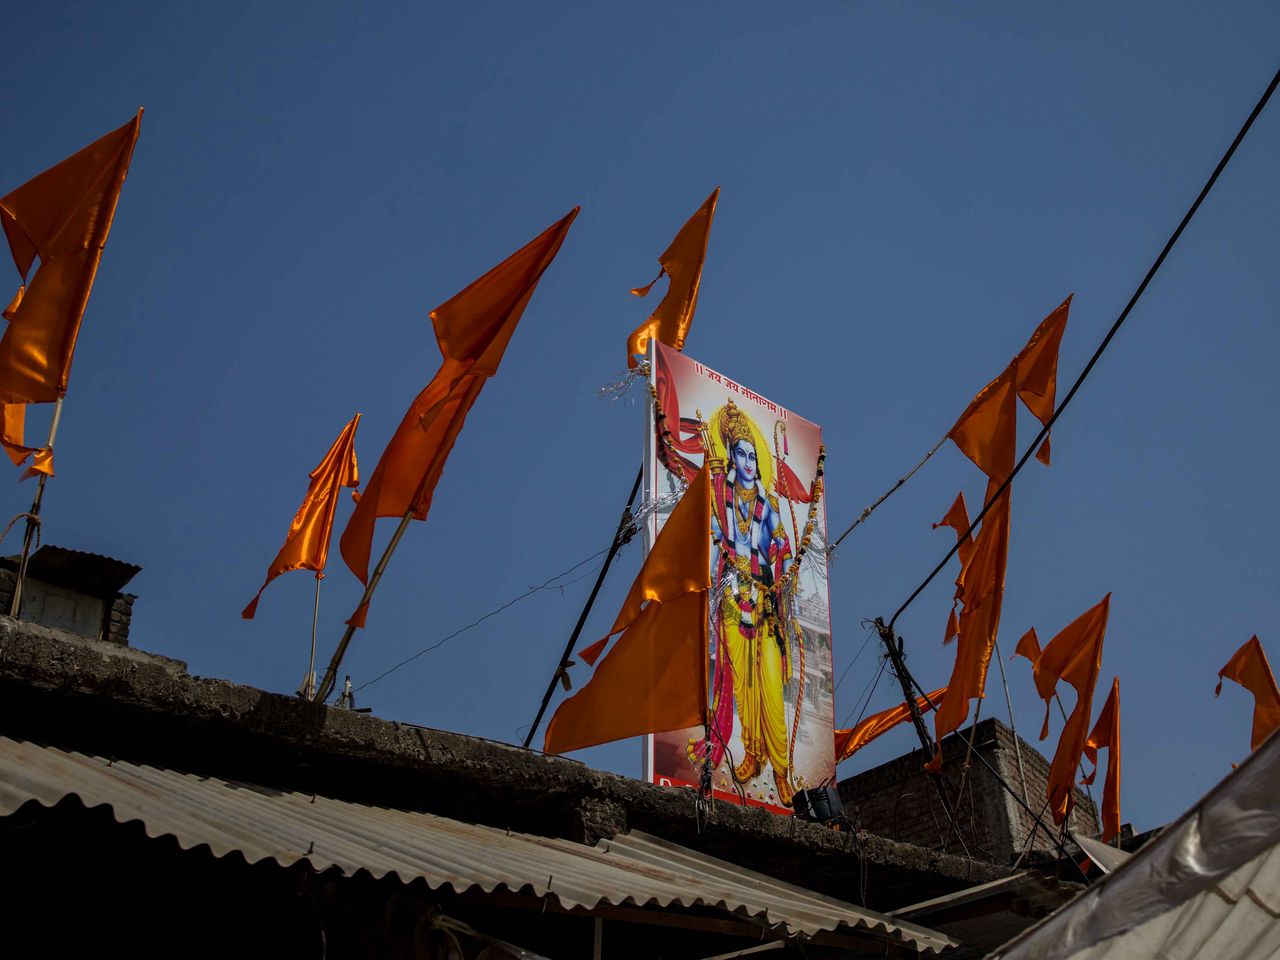 A poster of Hindu deity lord Rama pictured with saffron flags at the site where communal clashes took place during a Hindu religious procession at Talaab Chowk in Khargone in India's Madhya Pradesh state on April 15, 2022. As a national campaign by right-wing groups inflames local tensions, Muslim communities are facing the harshest punishments, according to activists, analysts and retired officials.